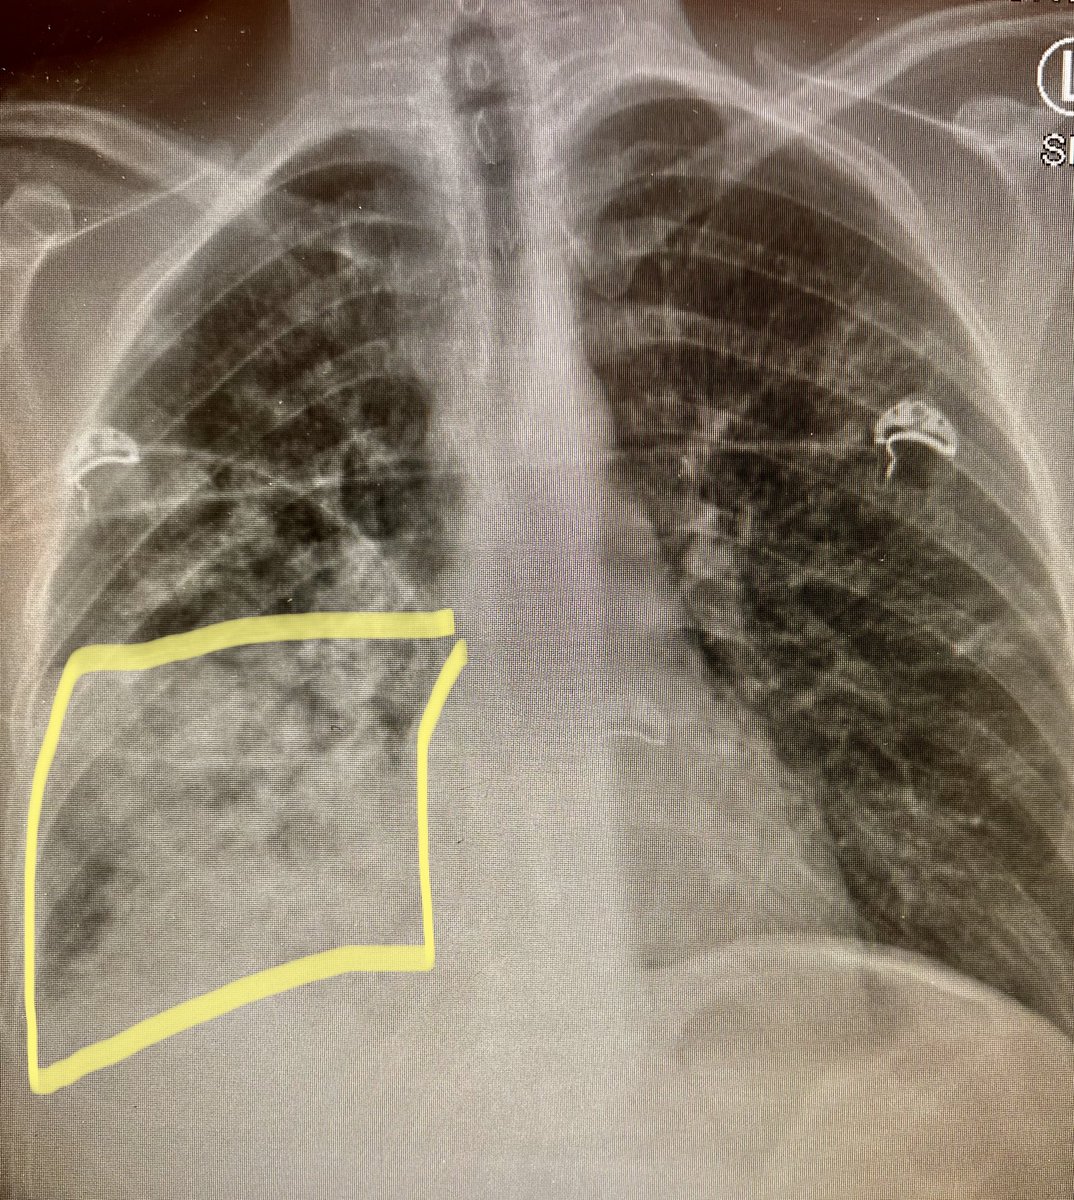 This is an X-ray of a person in their early 30s who is perfectly healthy. They have mild #omicron and severe bacterial pneumonia. (Yellow square). My ICU is full of these cases. Omicron suppresses immunity making people susceptible to severe disease. This makes everyone comorbid.